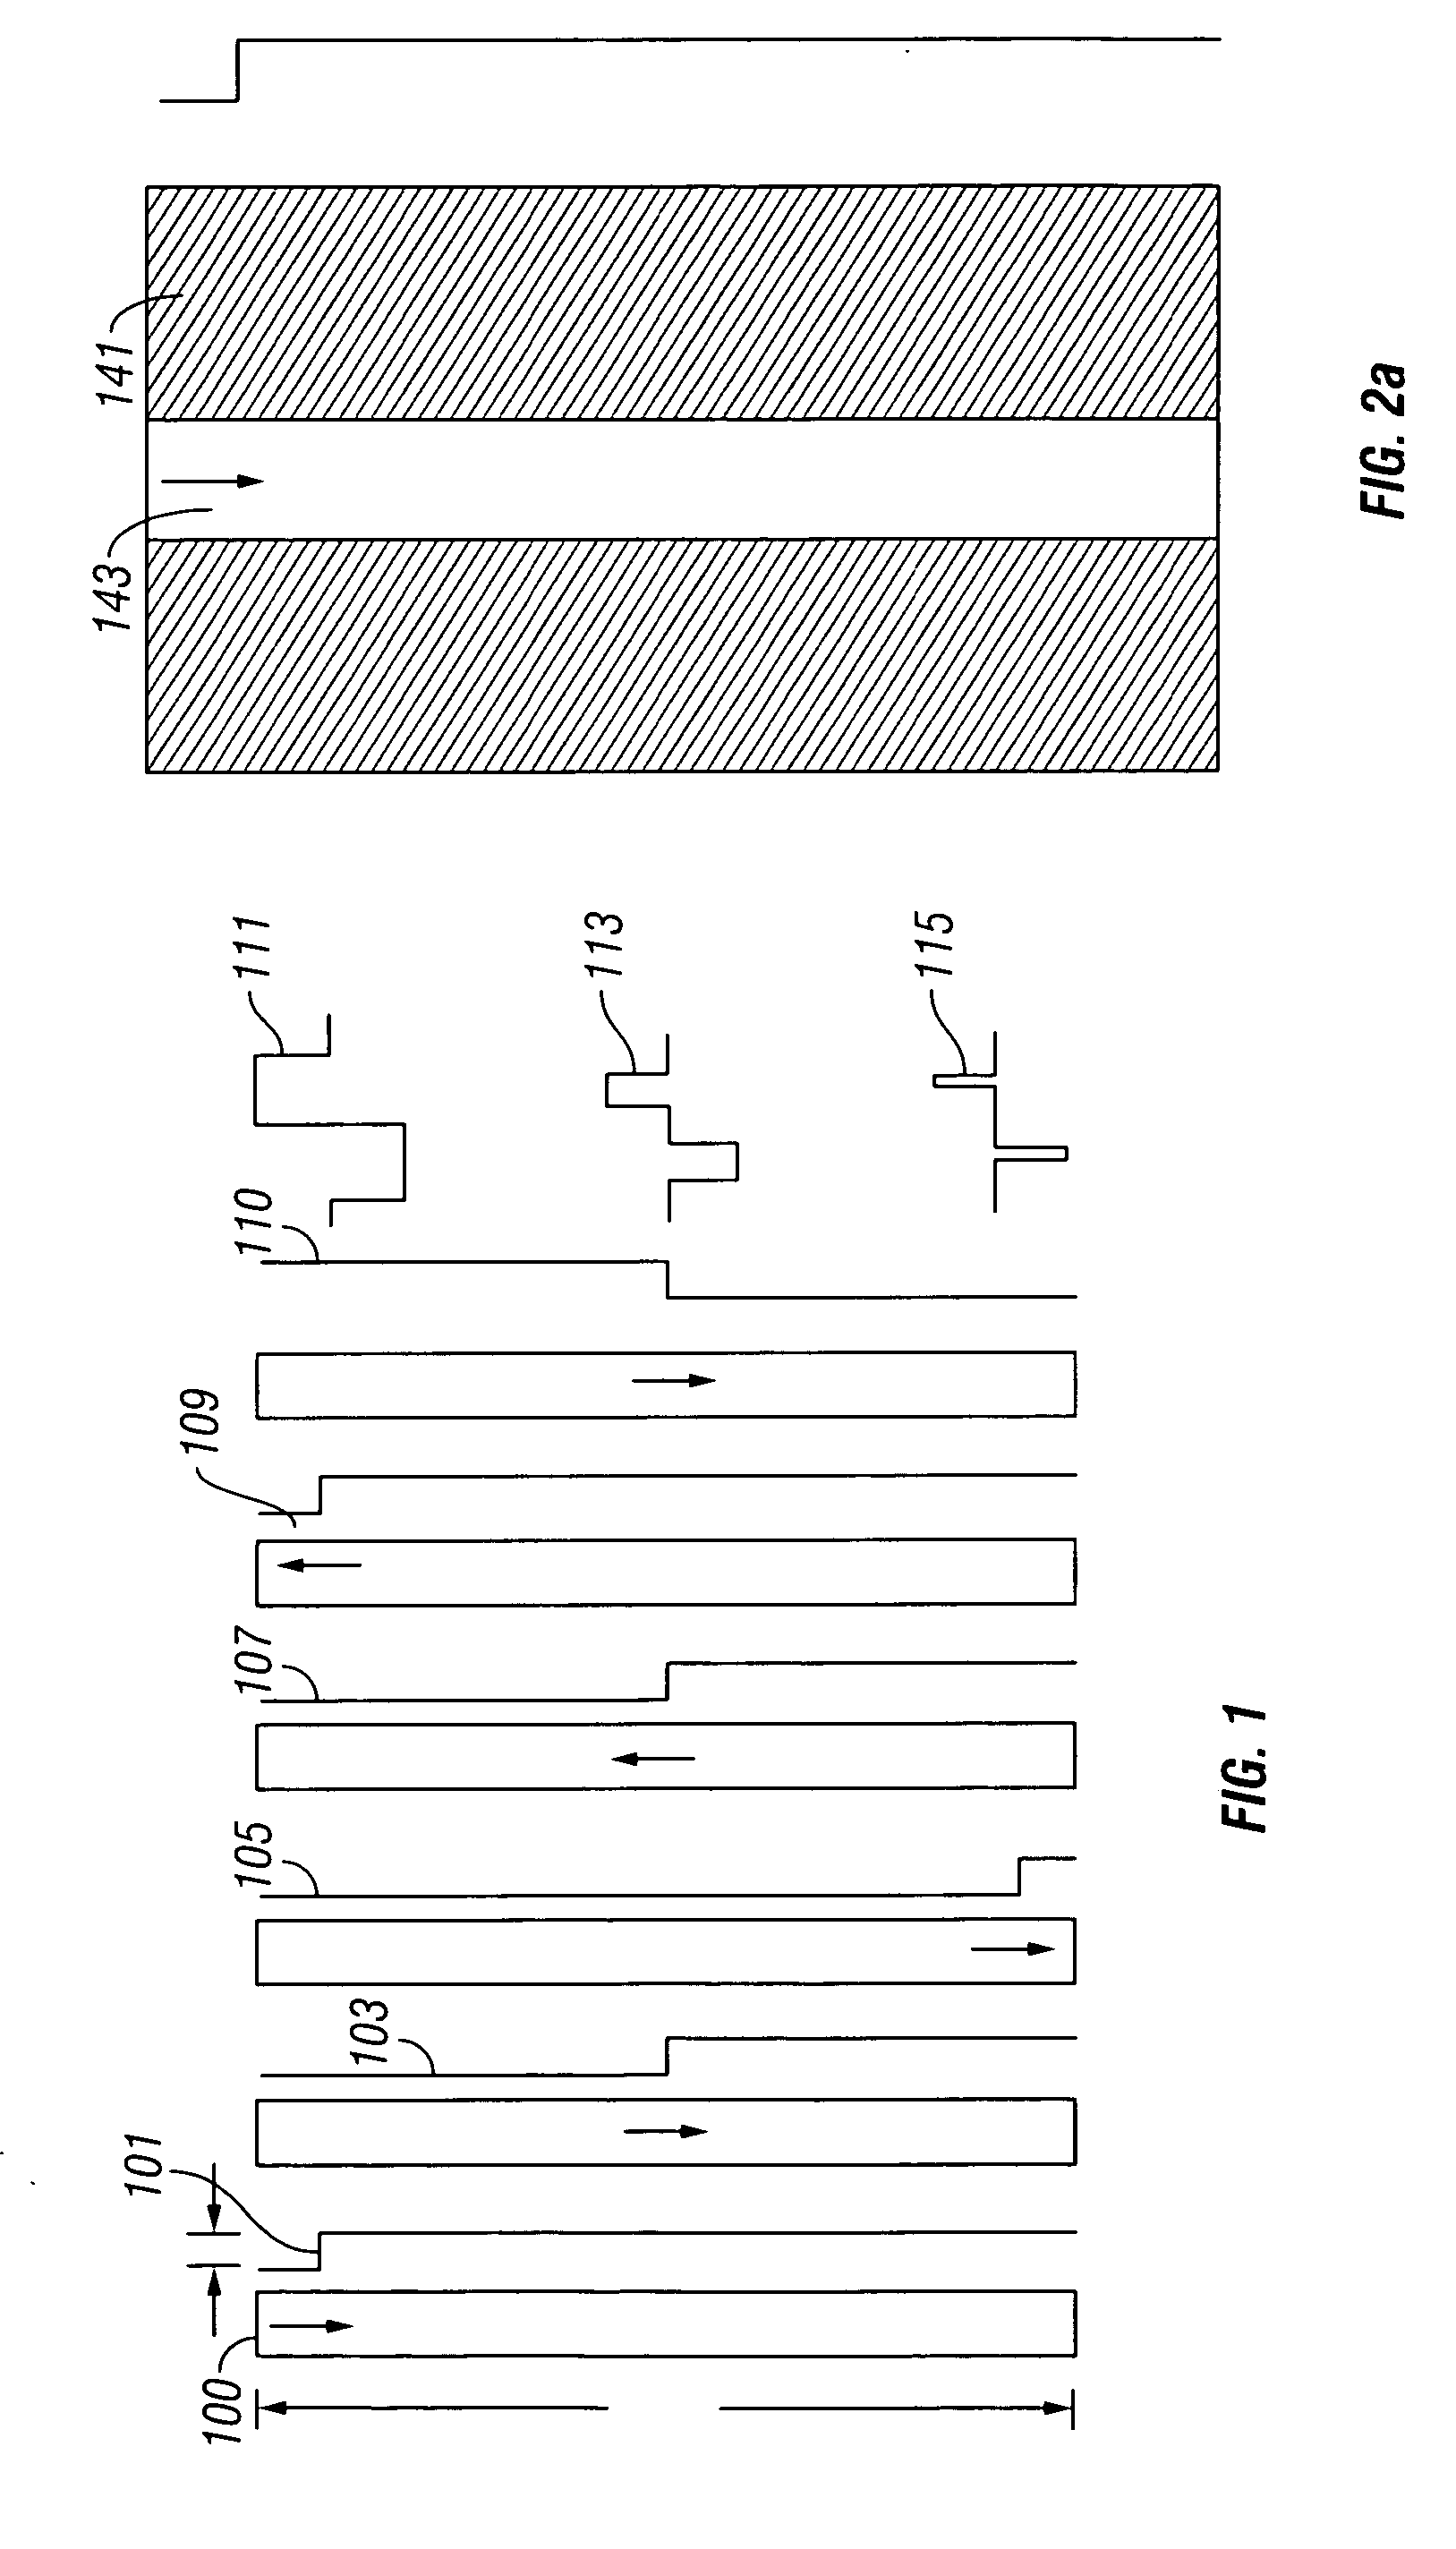 Methods and devices for analyzing and controlling the propagation of waves in a borehole generated by water hammer